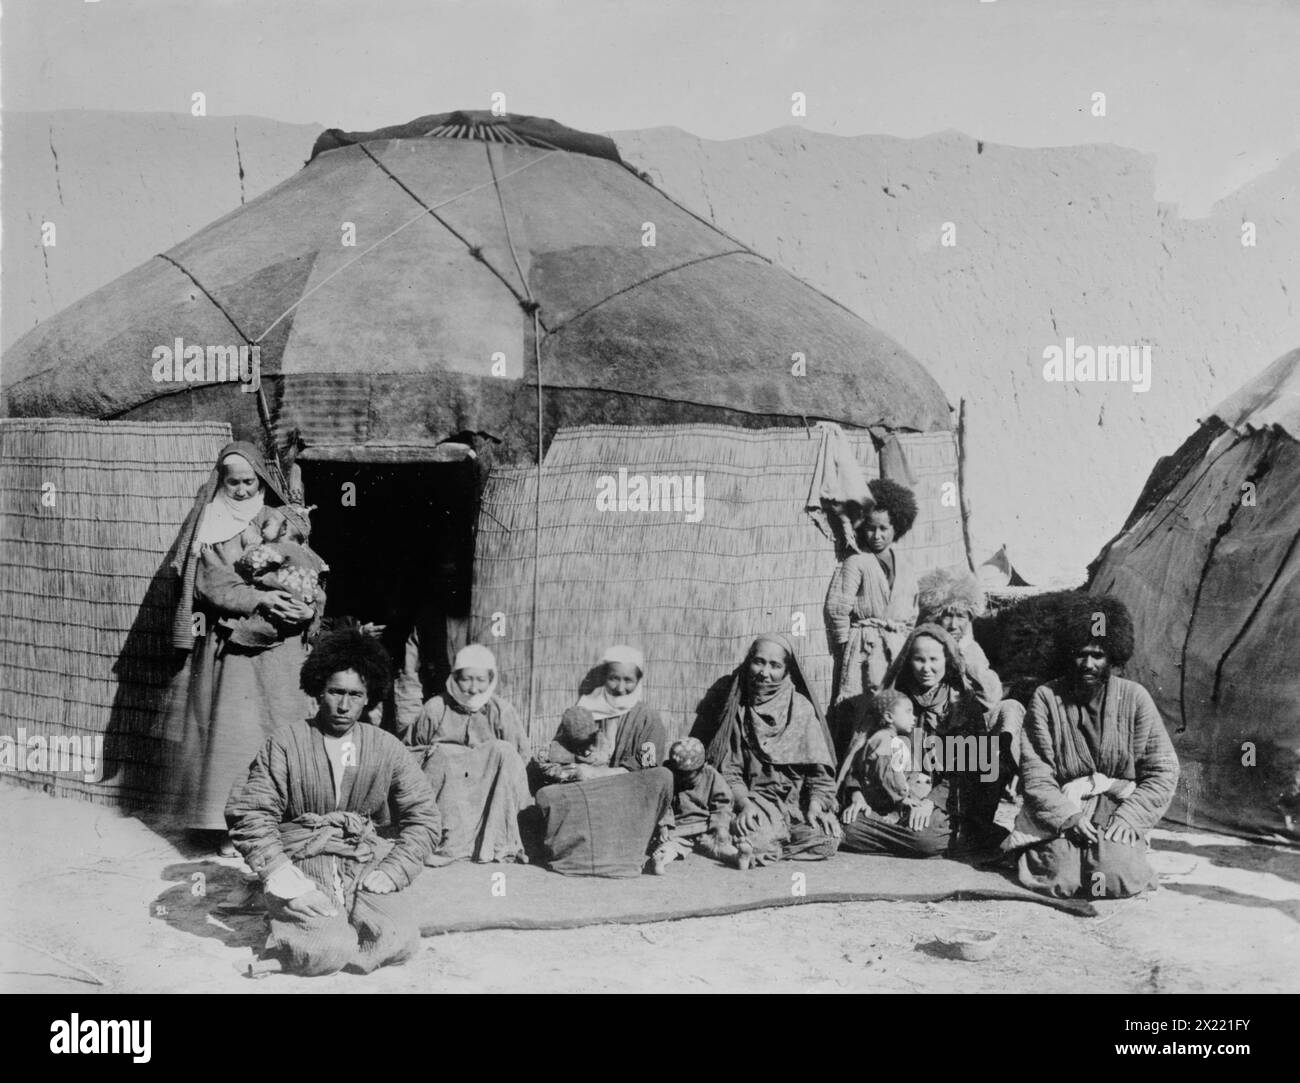 Afghan nomads, seated outside tent, 1919. Stock Photo